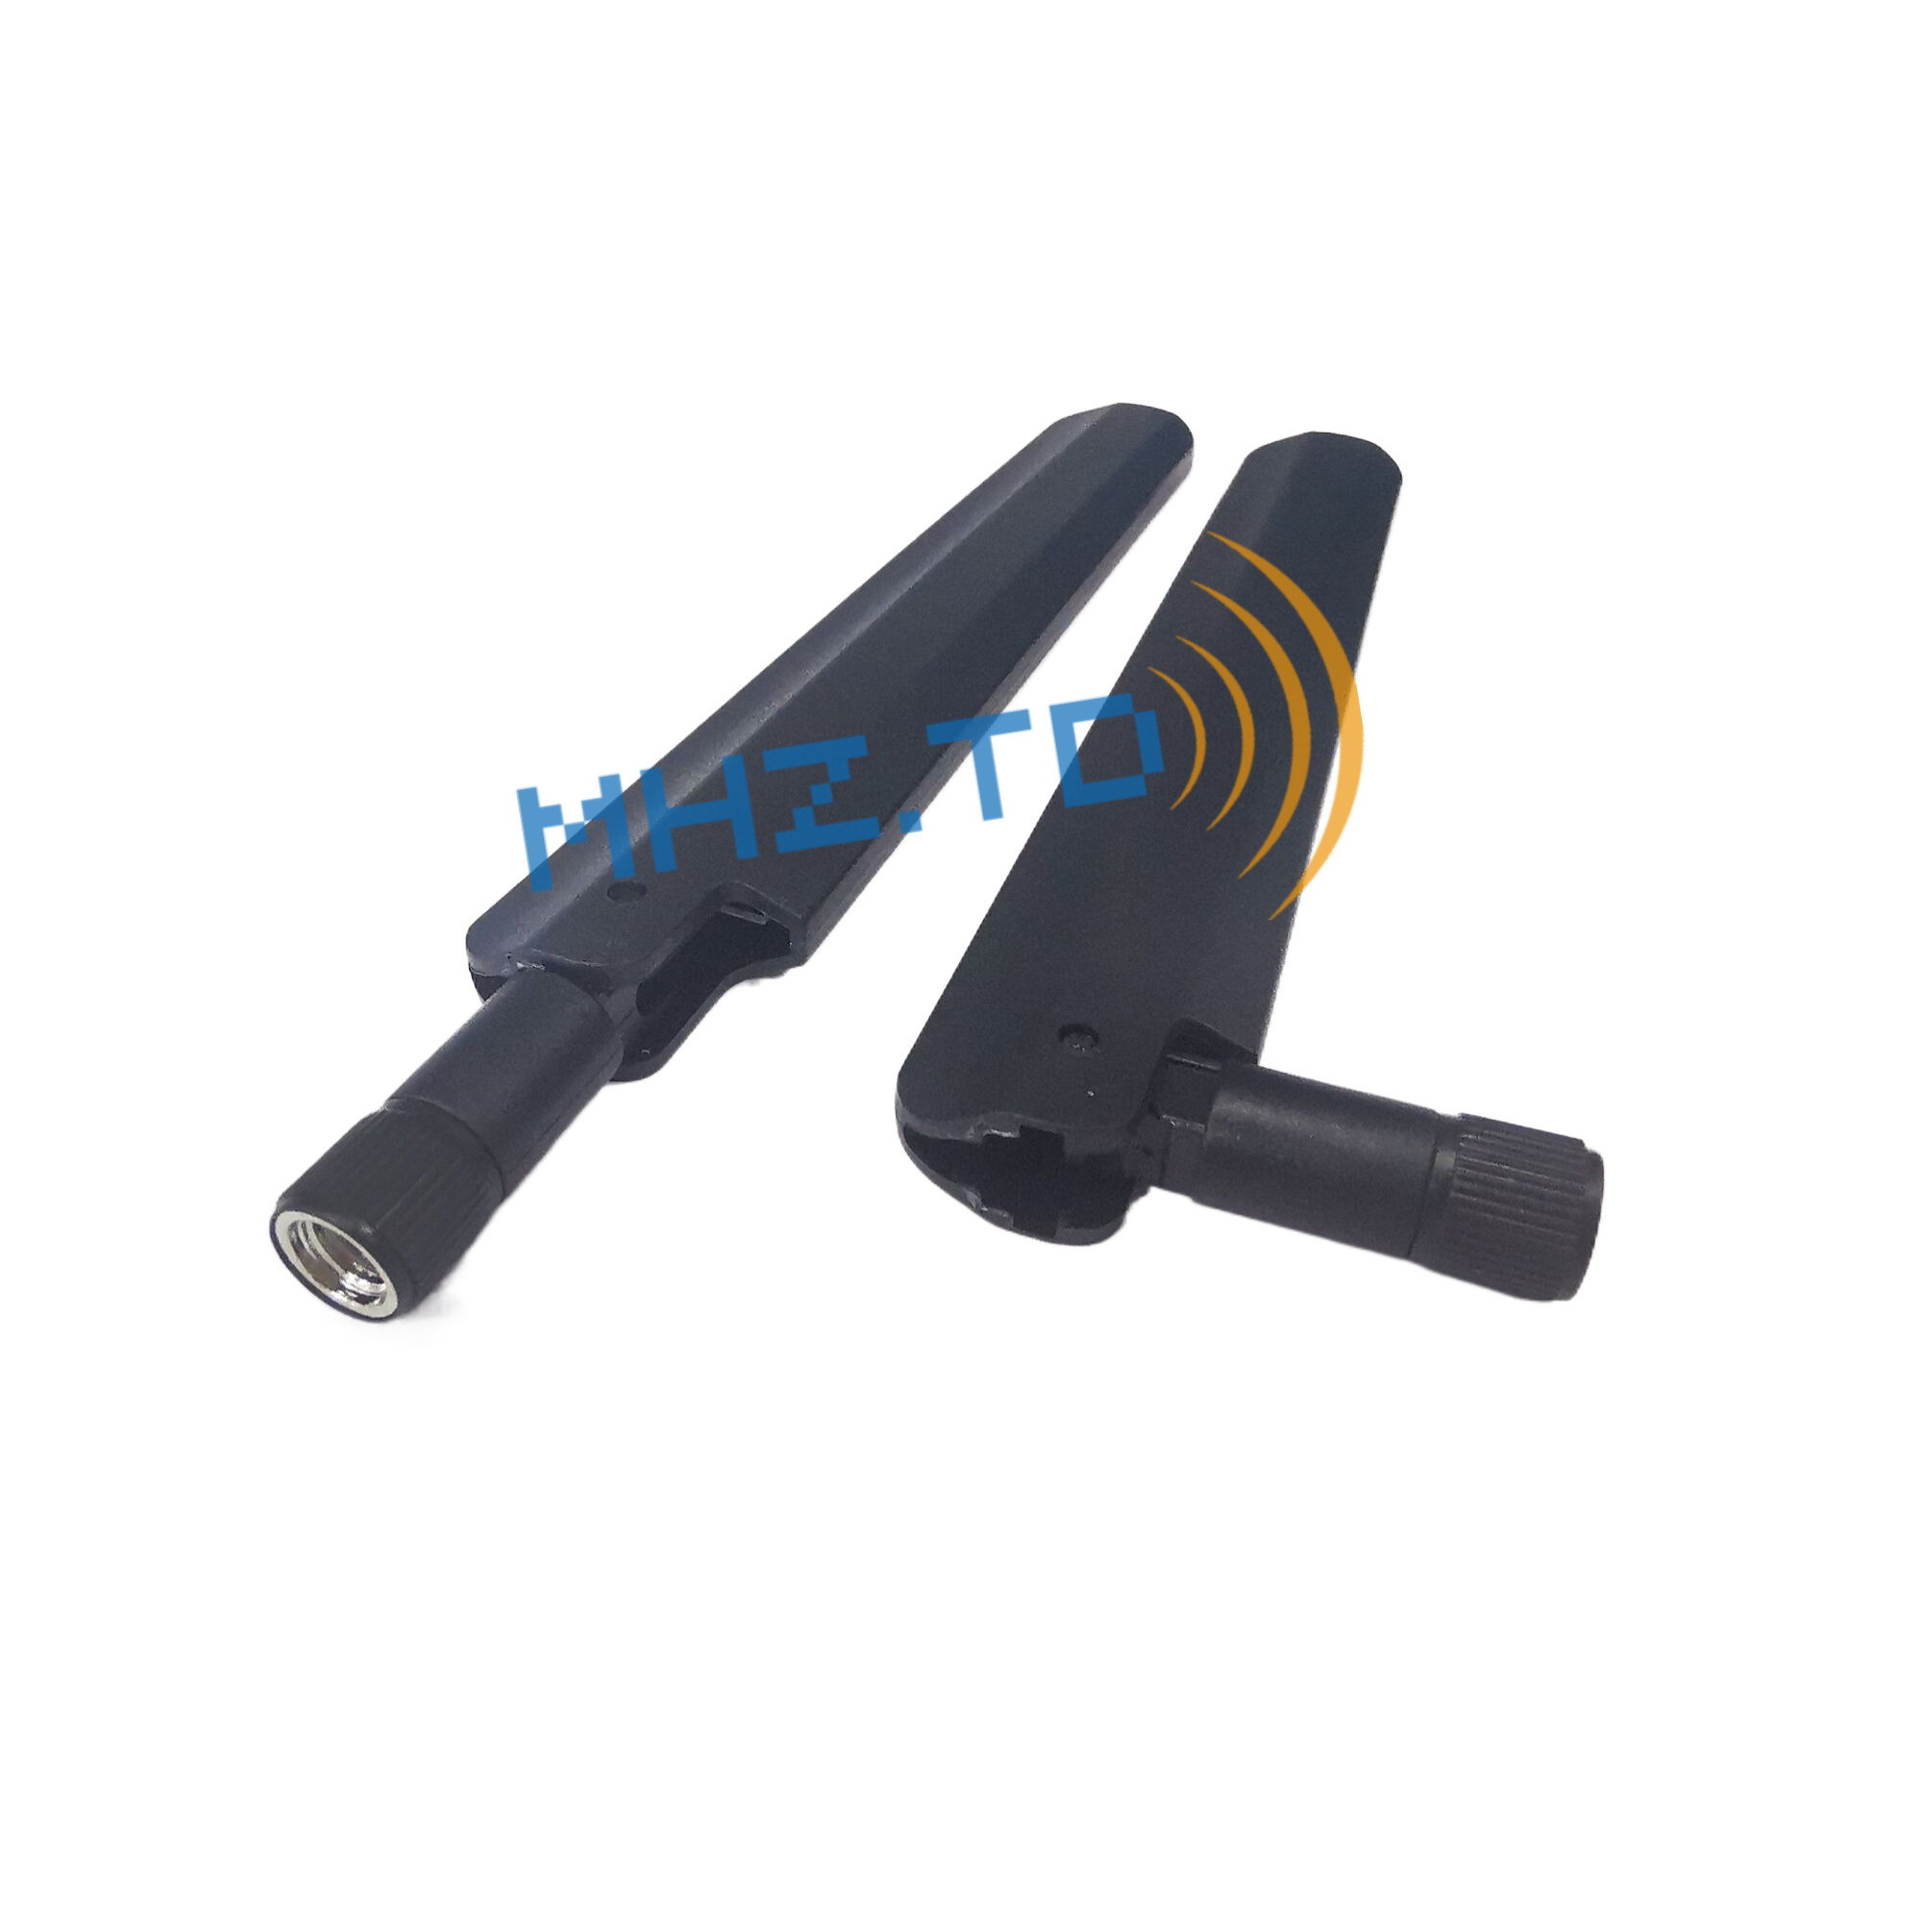 2G/3G/4G/5G Rubber antenna,paddle antenna,SMA male connector,External router antenna Featured Image